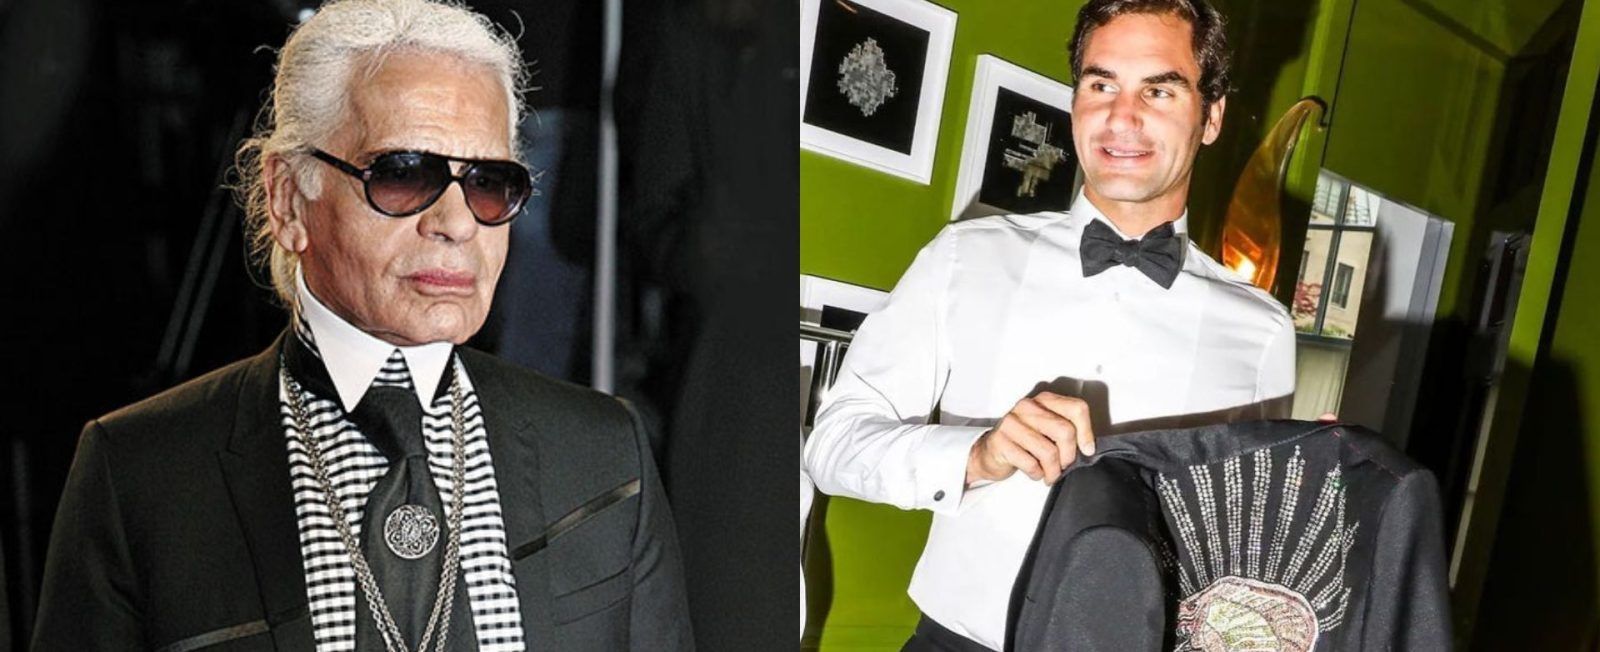 Met Gala 2023: Dress code, co-chairs announced for Karl Lagerfeld theme